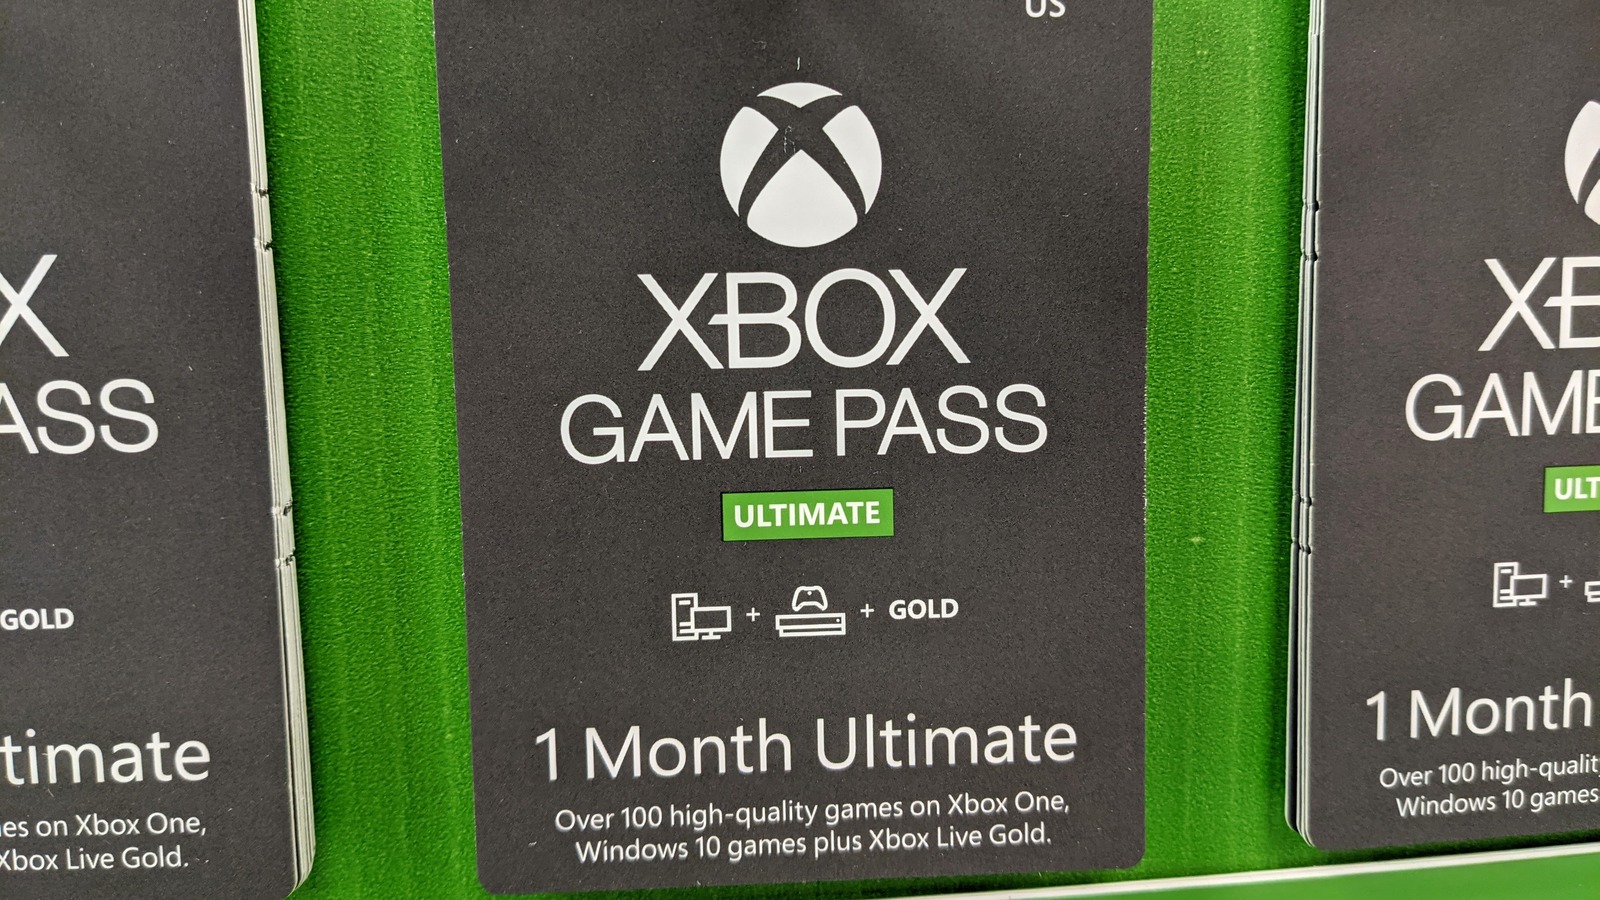 Xbox Game Pass Ultimate 3 Months cheapest price!